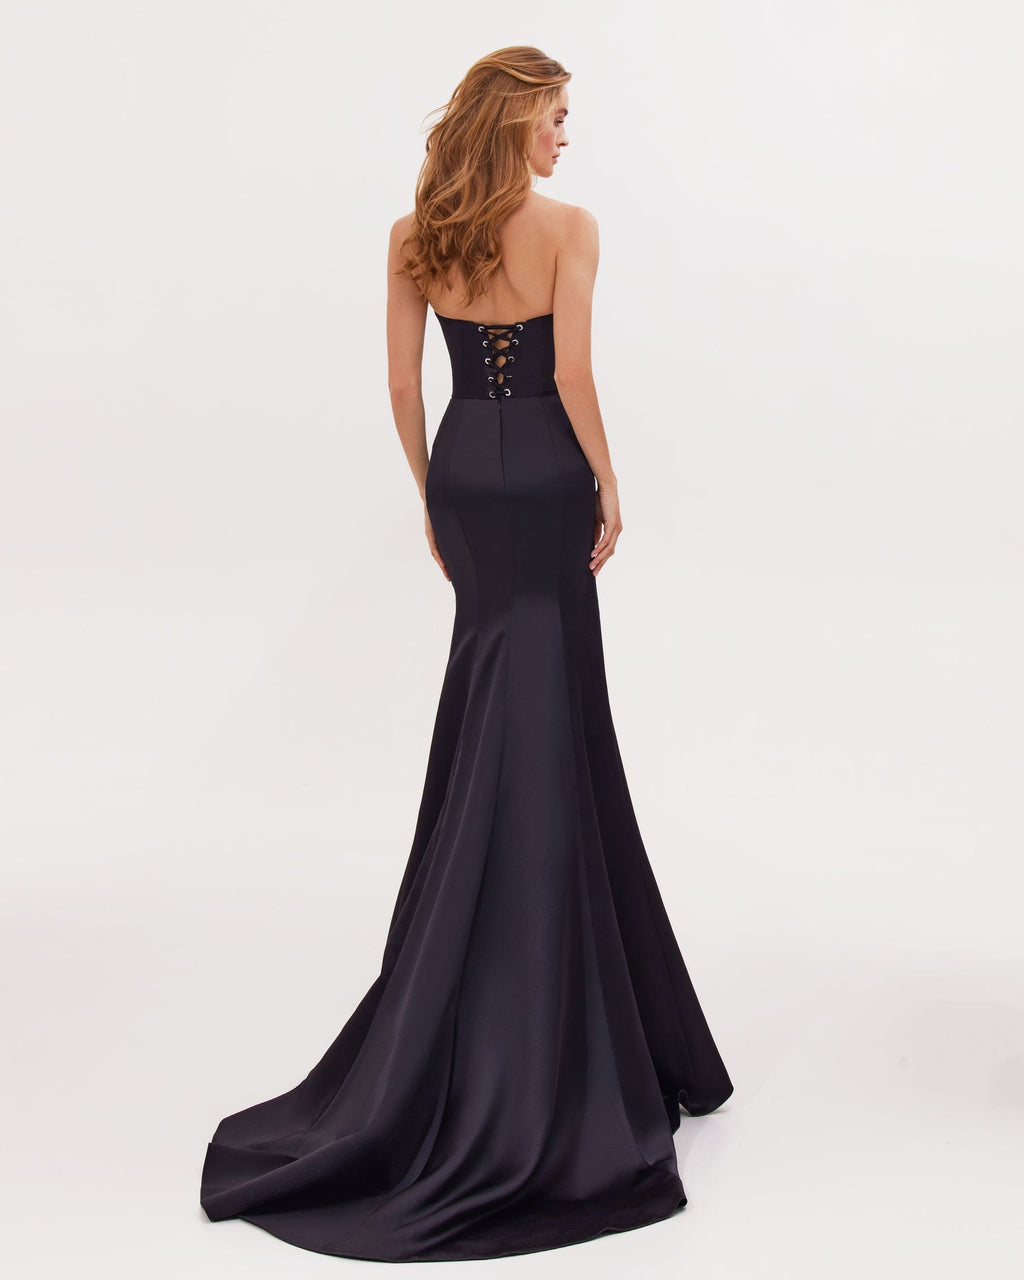 Black Strapless evening gown with thigh slit